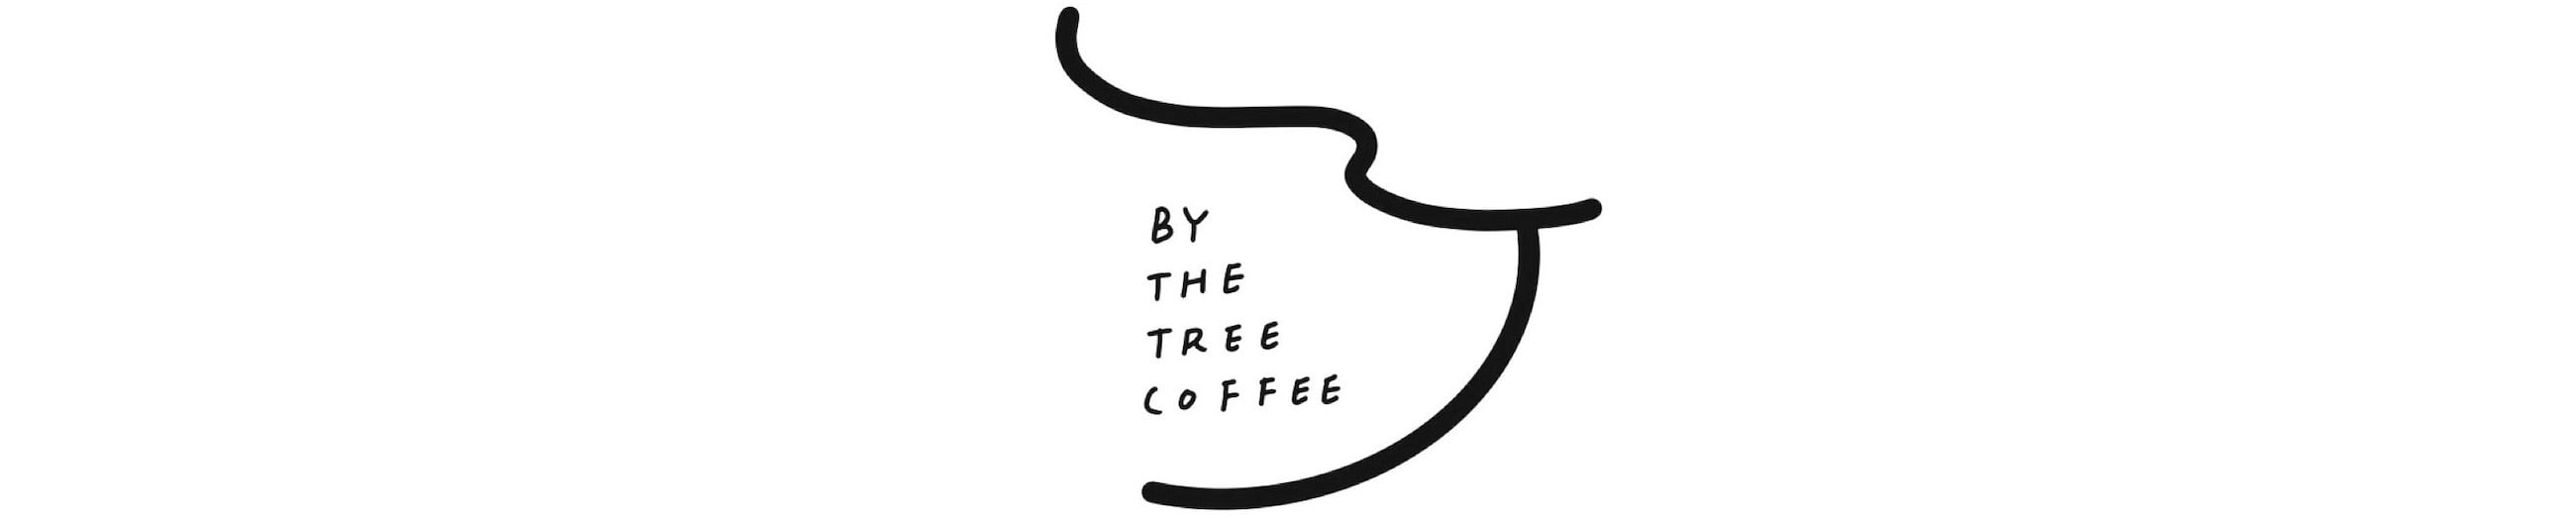 BY THE TREE COFFEE